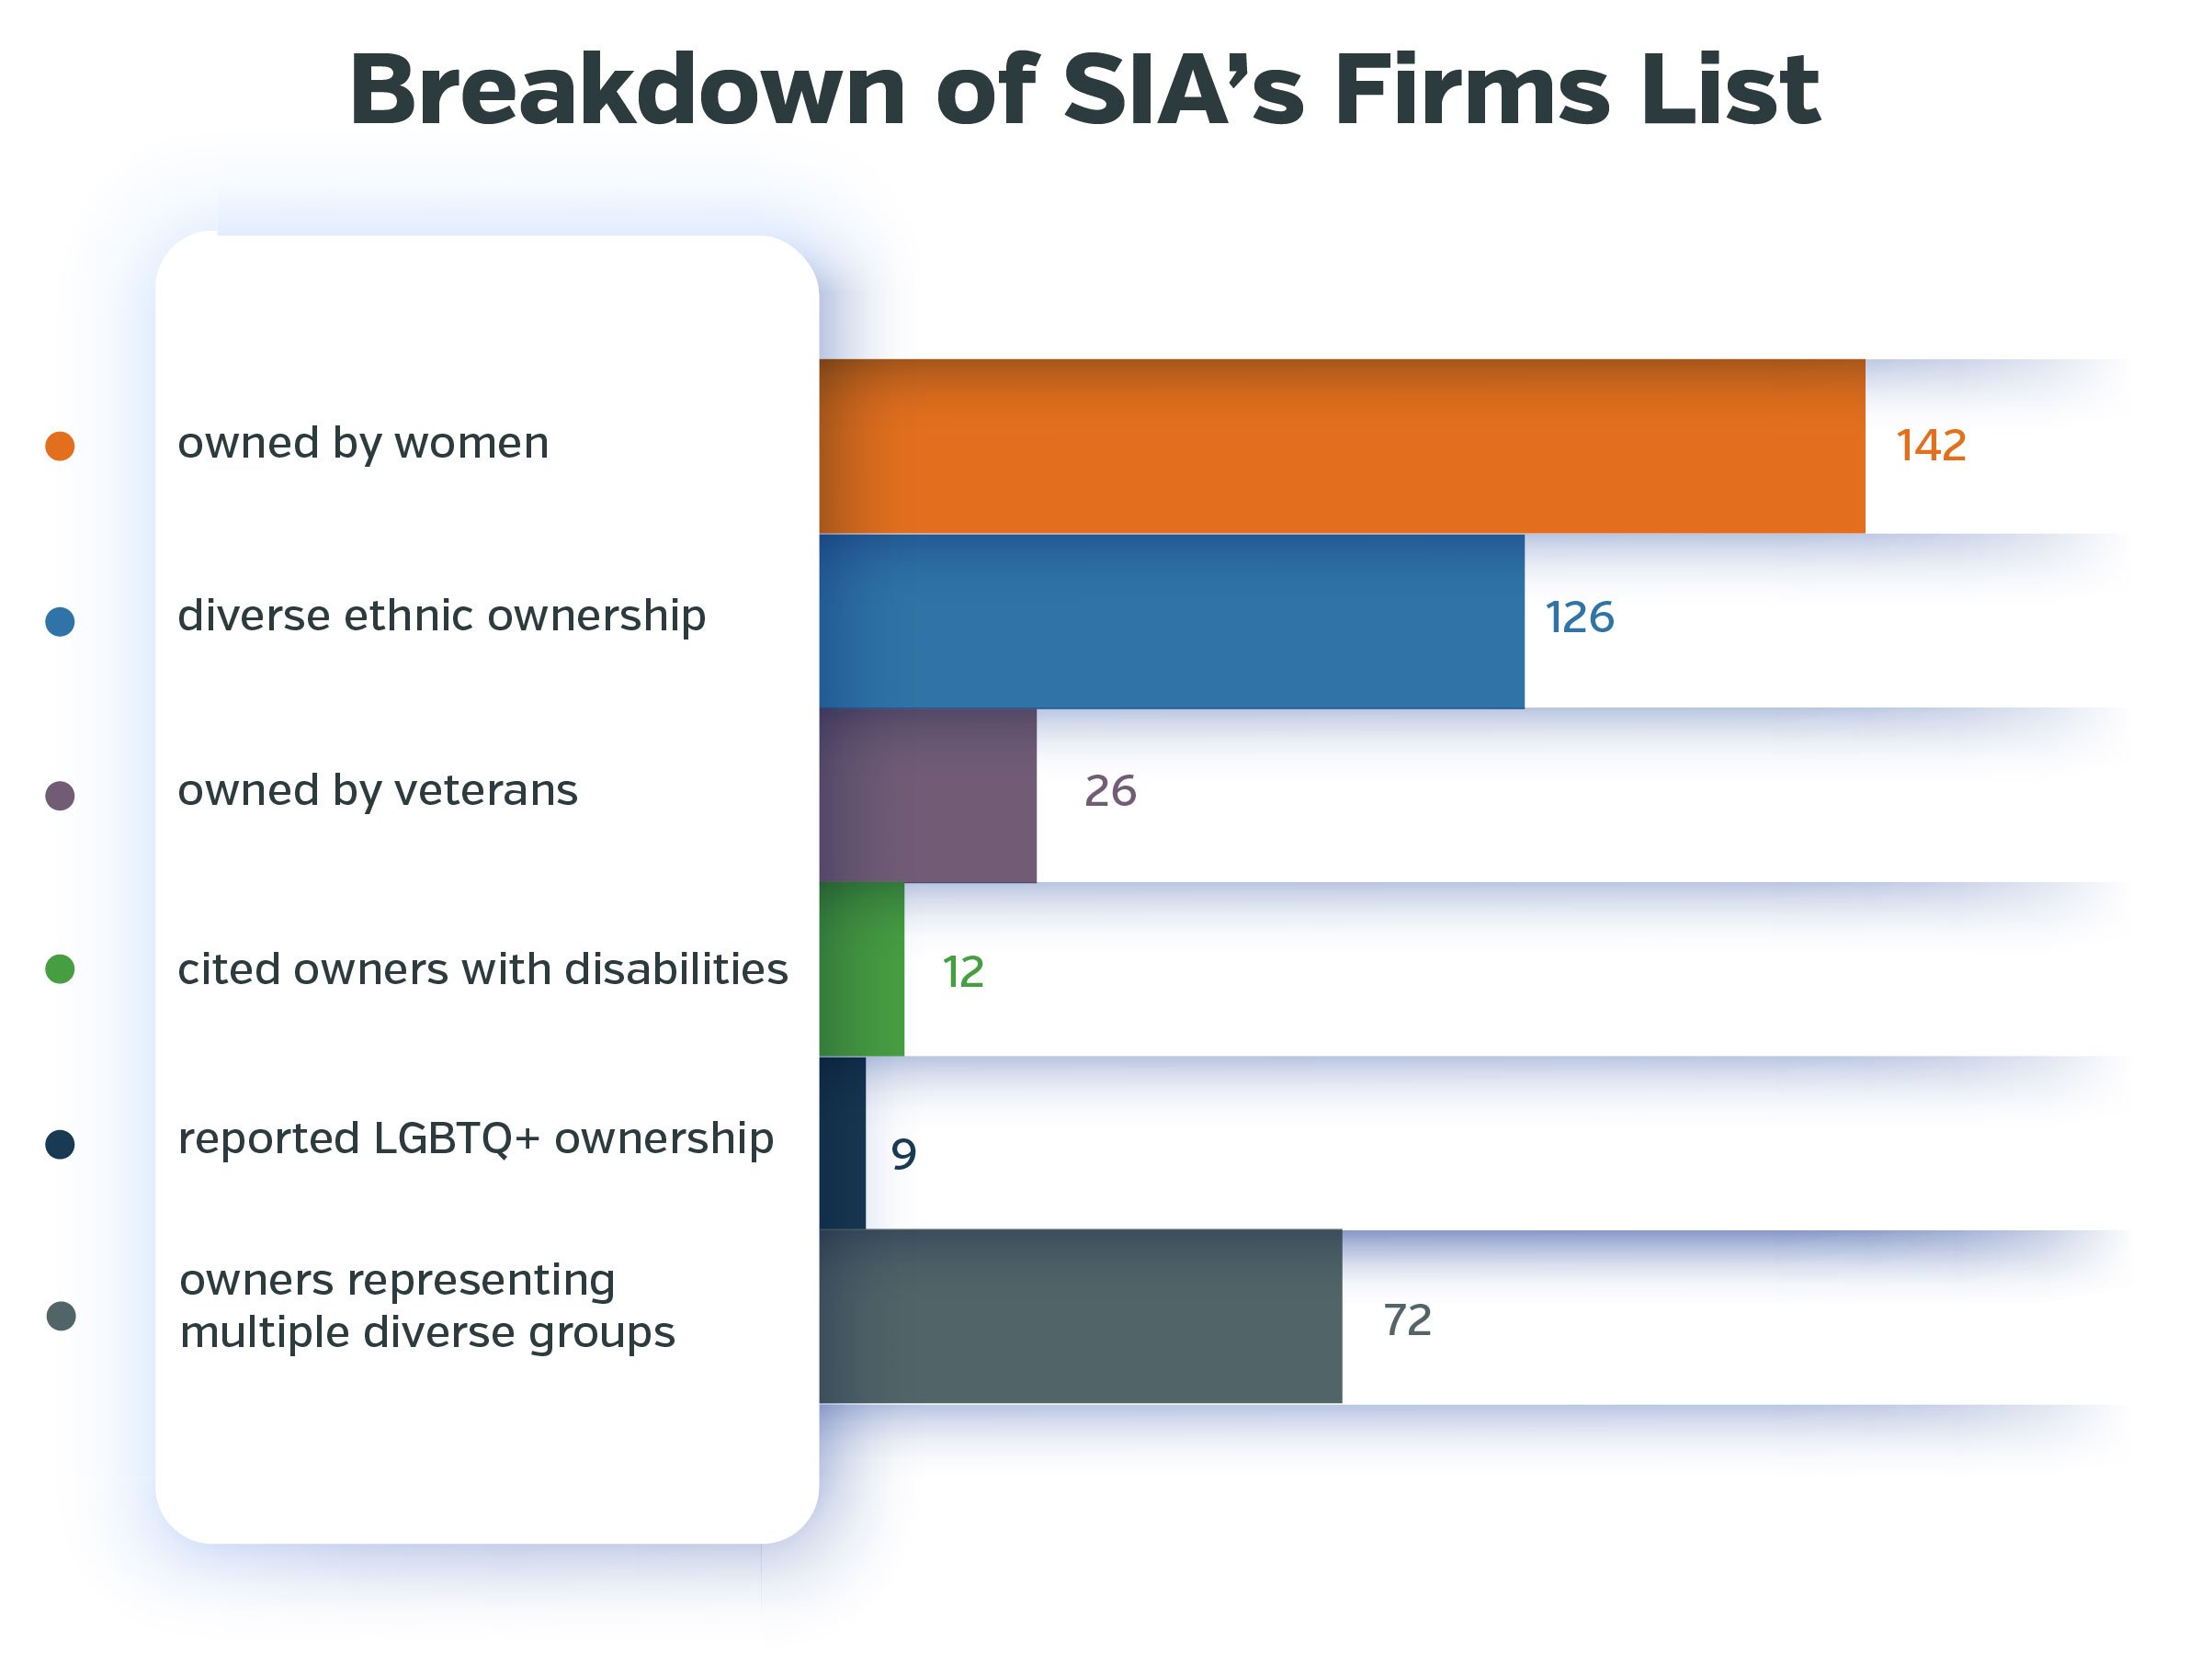 Breakdown of SIAs Firms List - 142 firms are owned by women 126 firms cited diverse ethnic ownership. Of those: 78 are Asian- or South Asian-owned 27 Black-owned 16 Hispanic-owned 5 Native American-owned 26 firms are owned by veterans 12 firms cited owners with disabilities 9 firms reported LGBTQ+ ownership 72 firms have owners representing multiple diverse groups